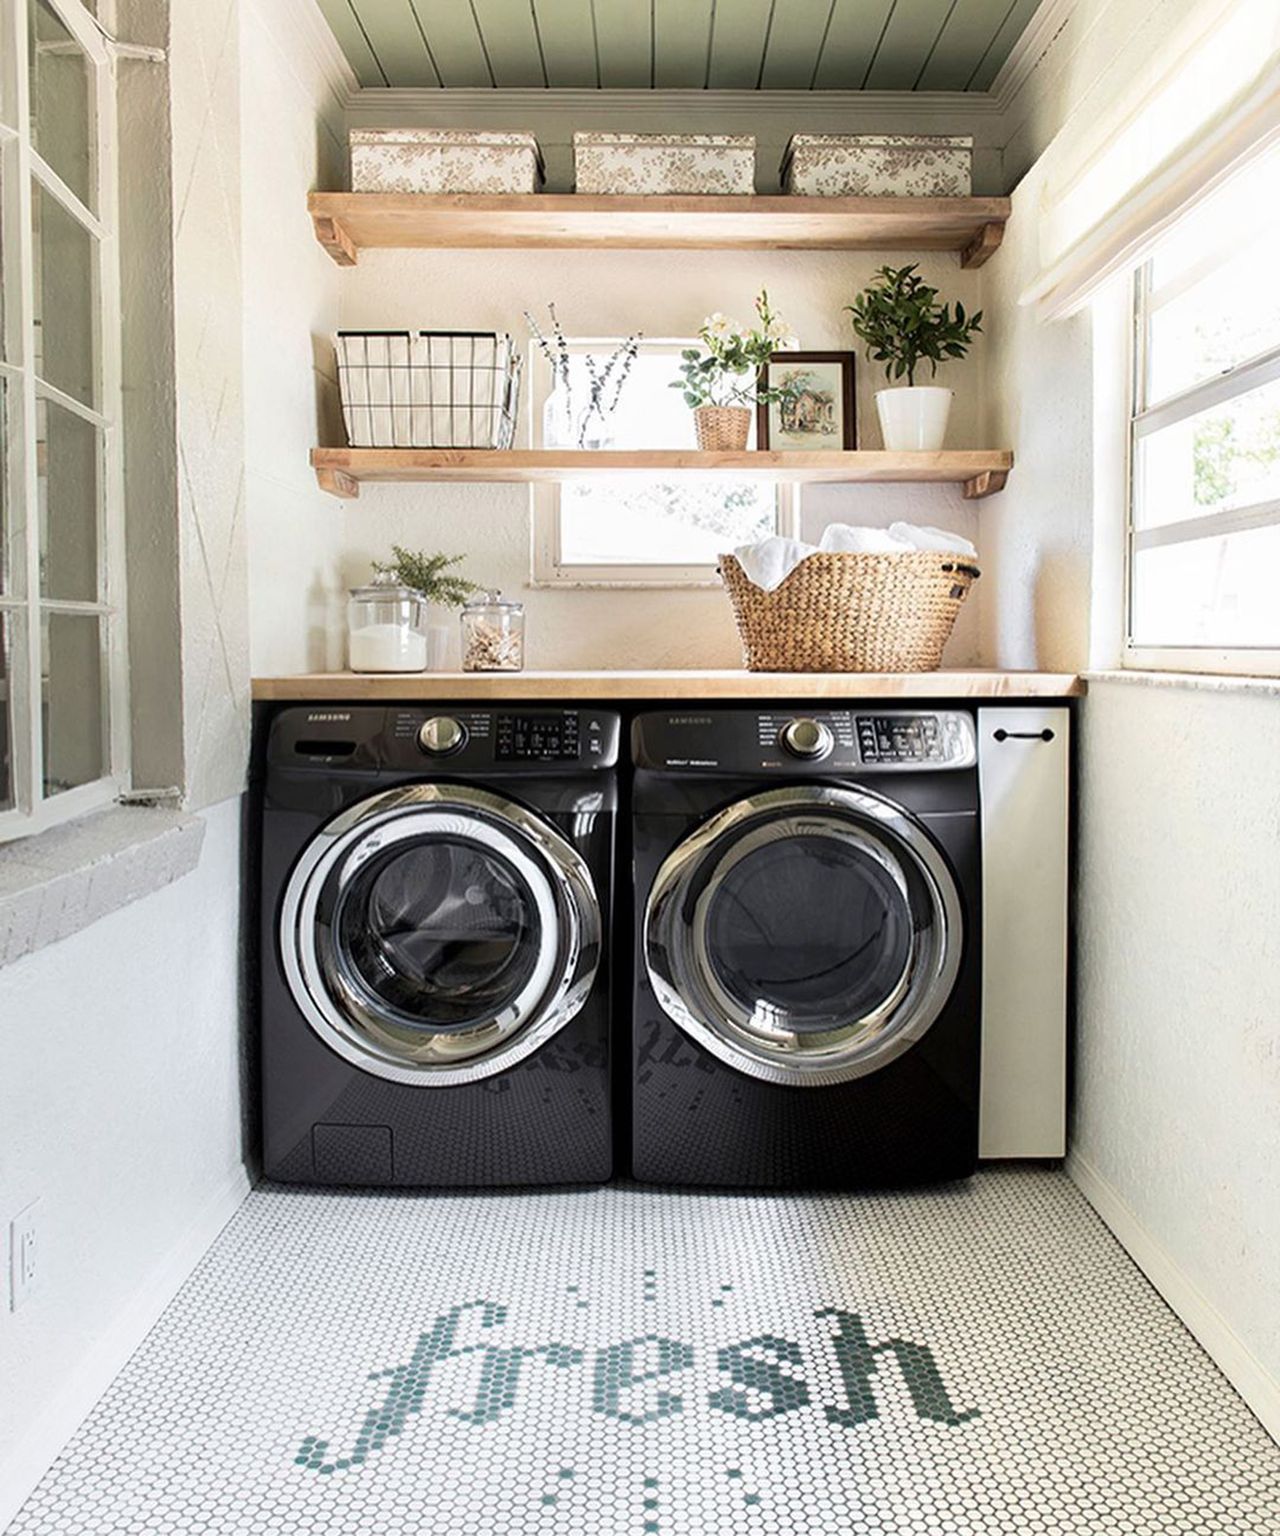 11 mudroom laundry ideas – the perfect combo | Real Homes